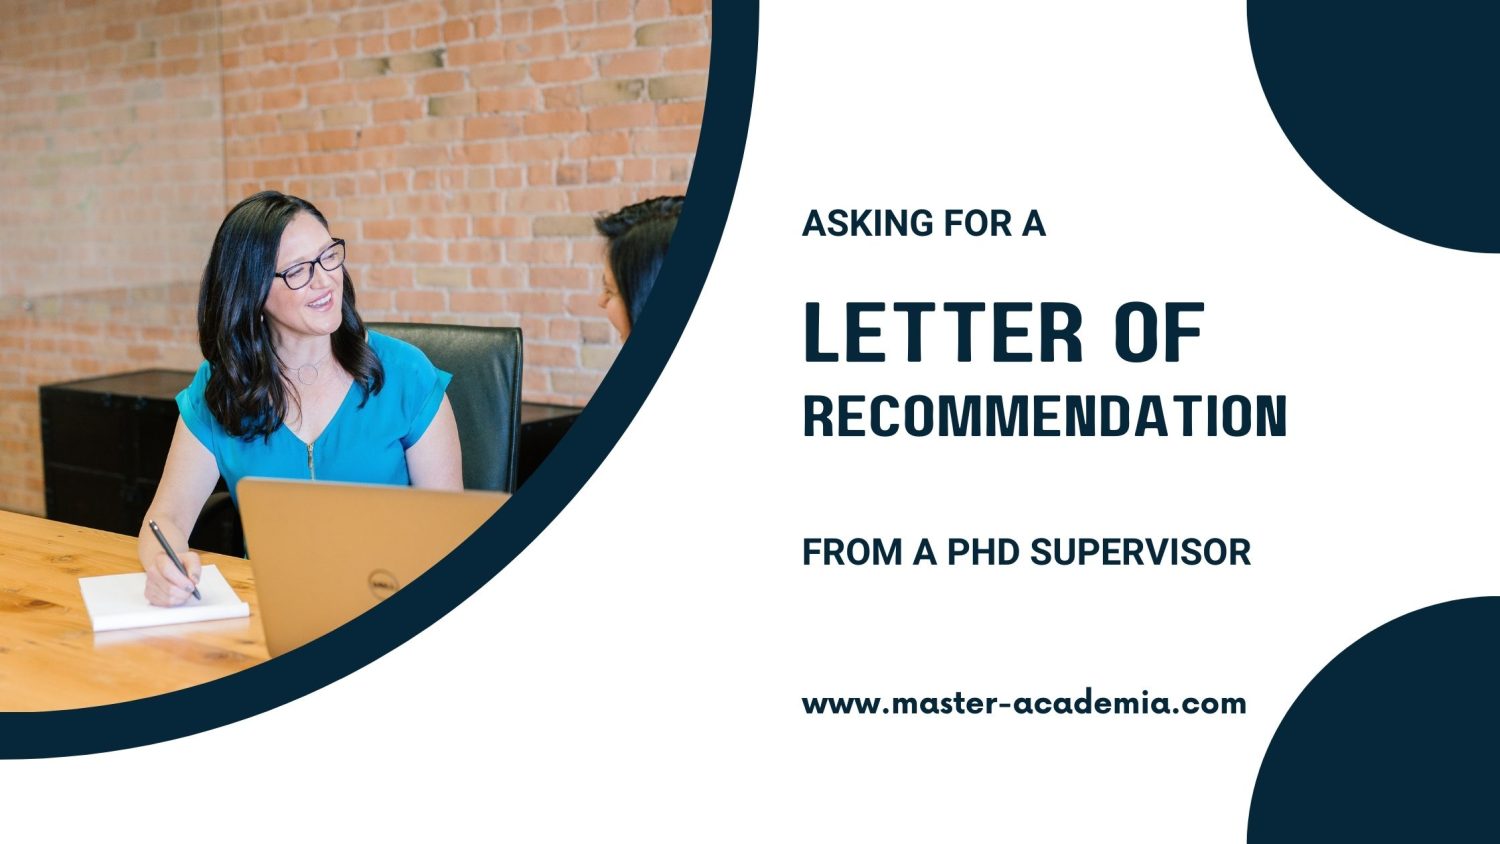 recommendation letter by phd supervisor